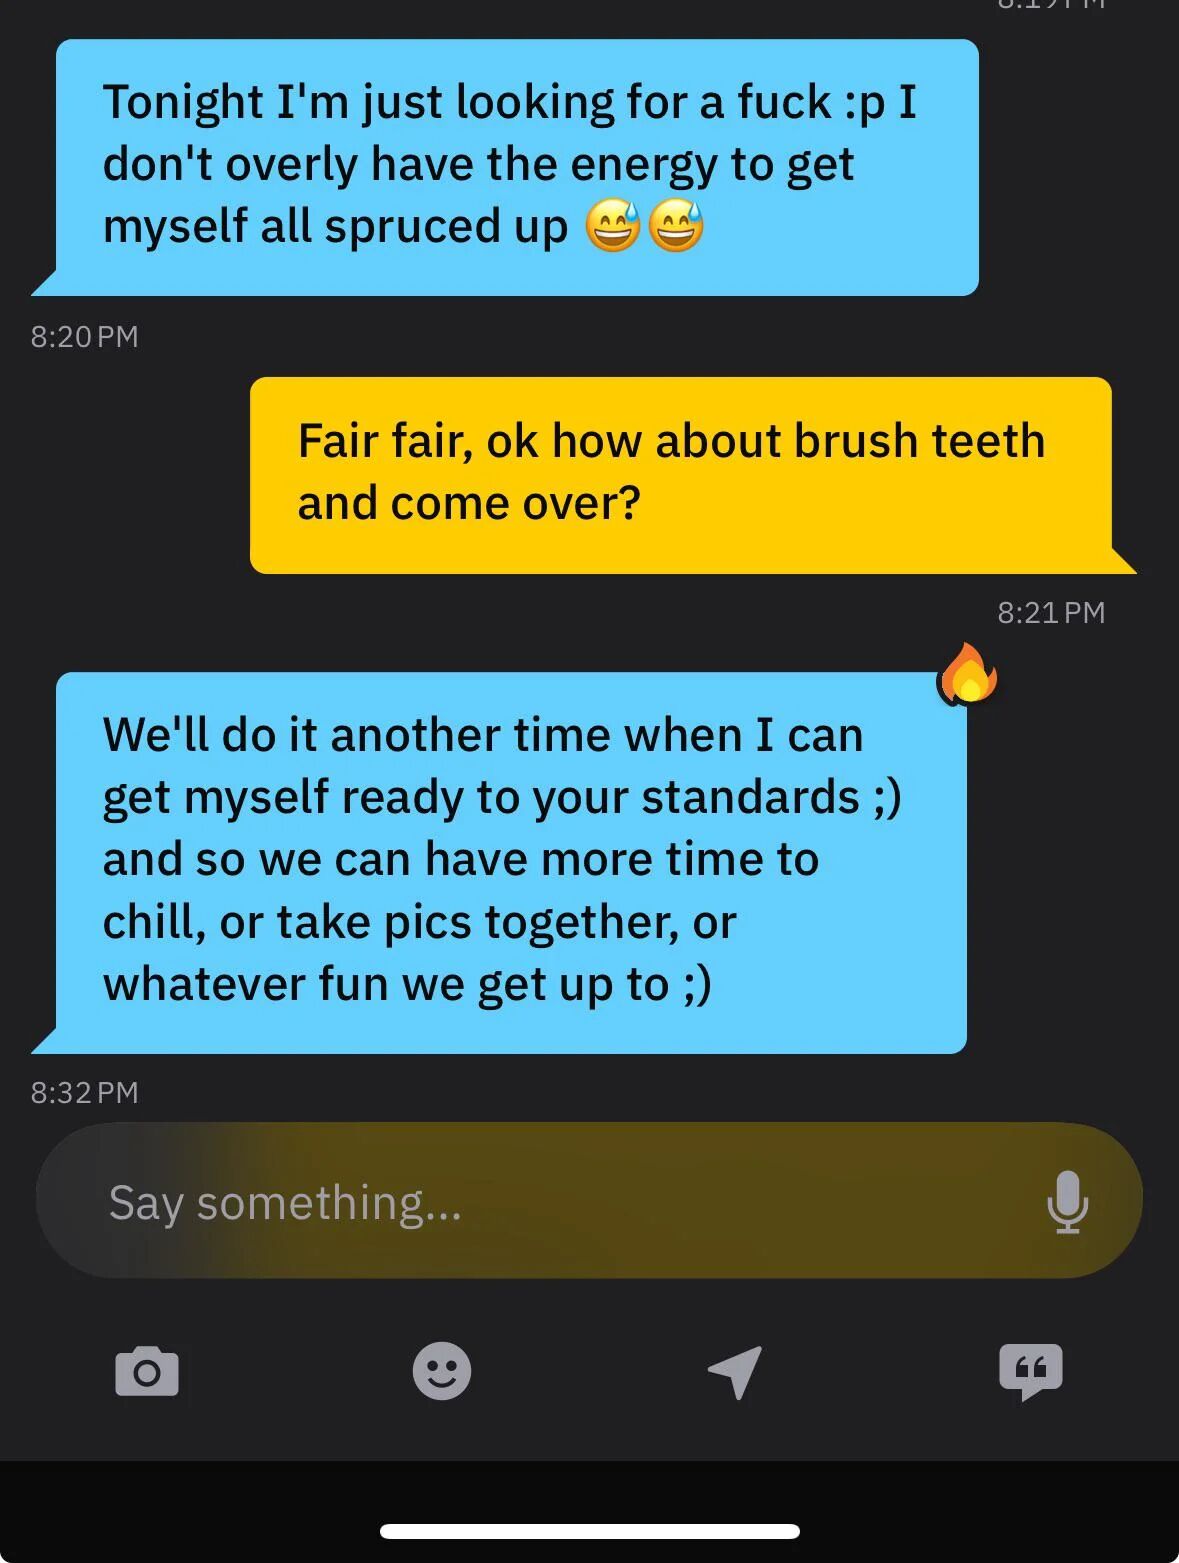 A Grindr conversation about showers and hygiene